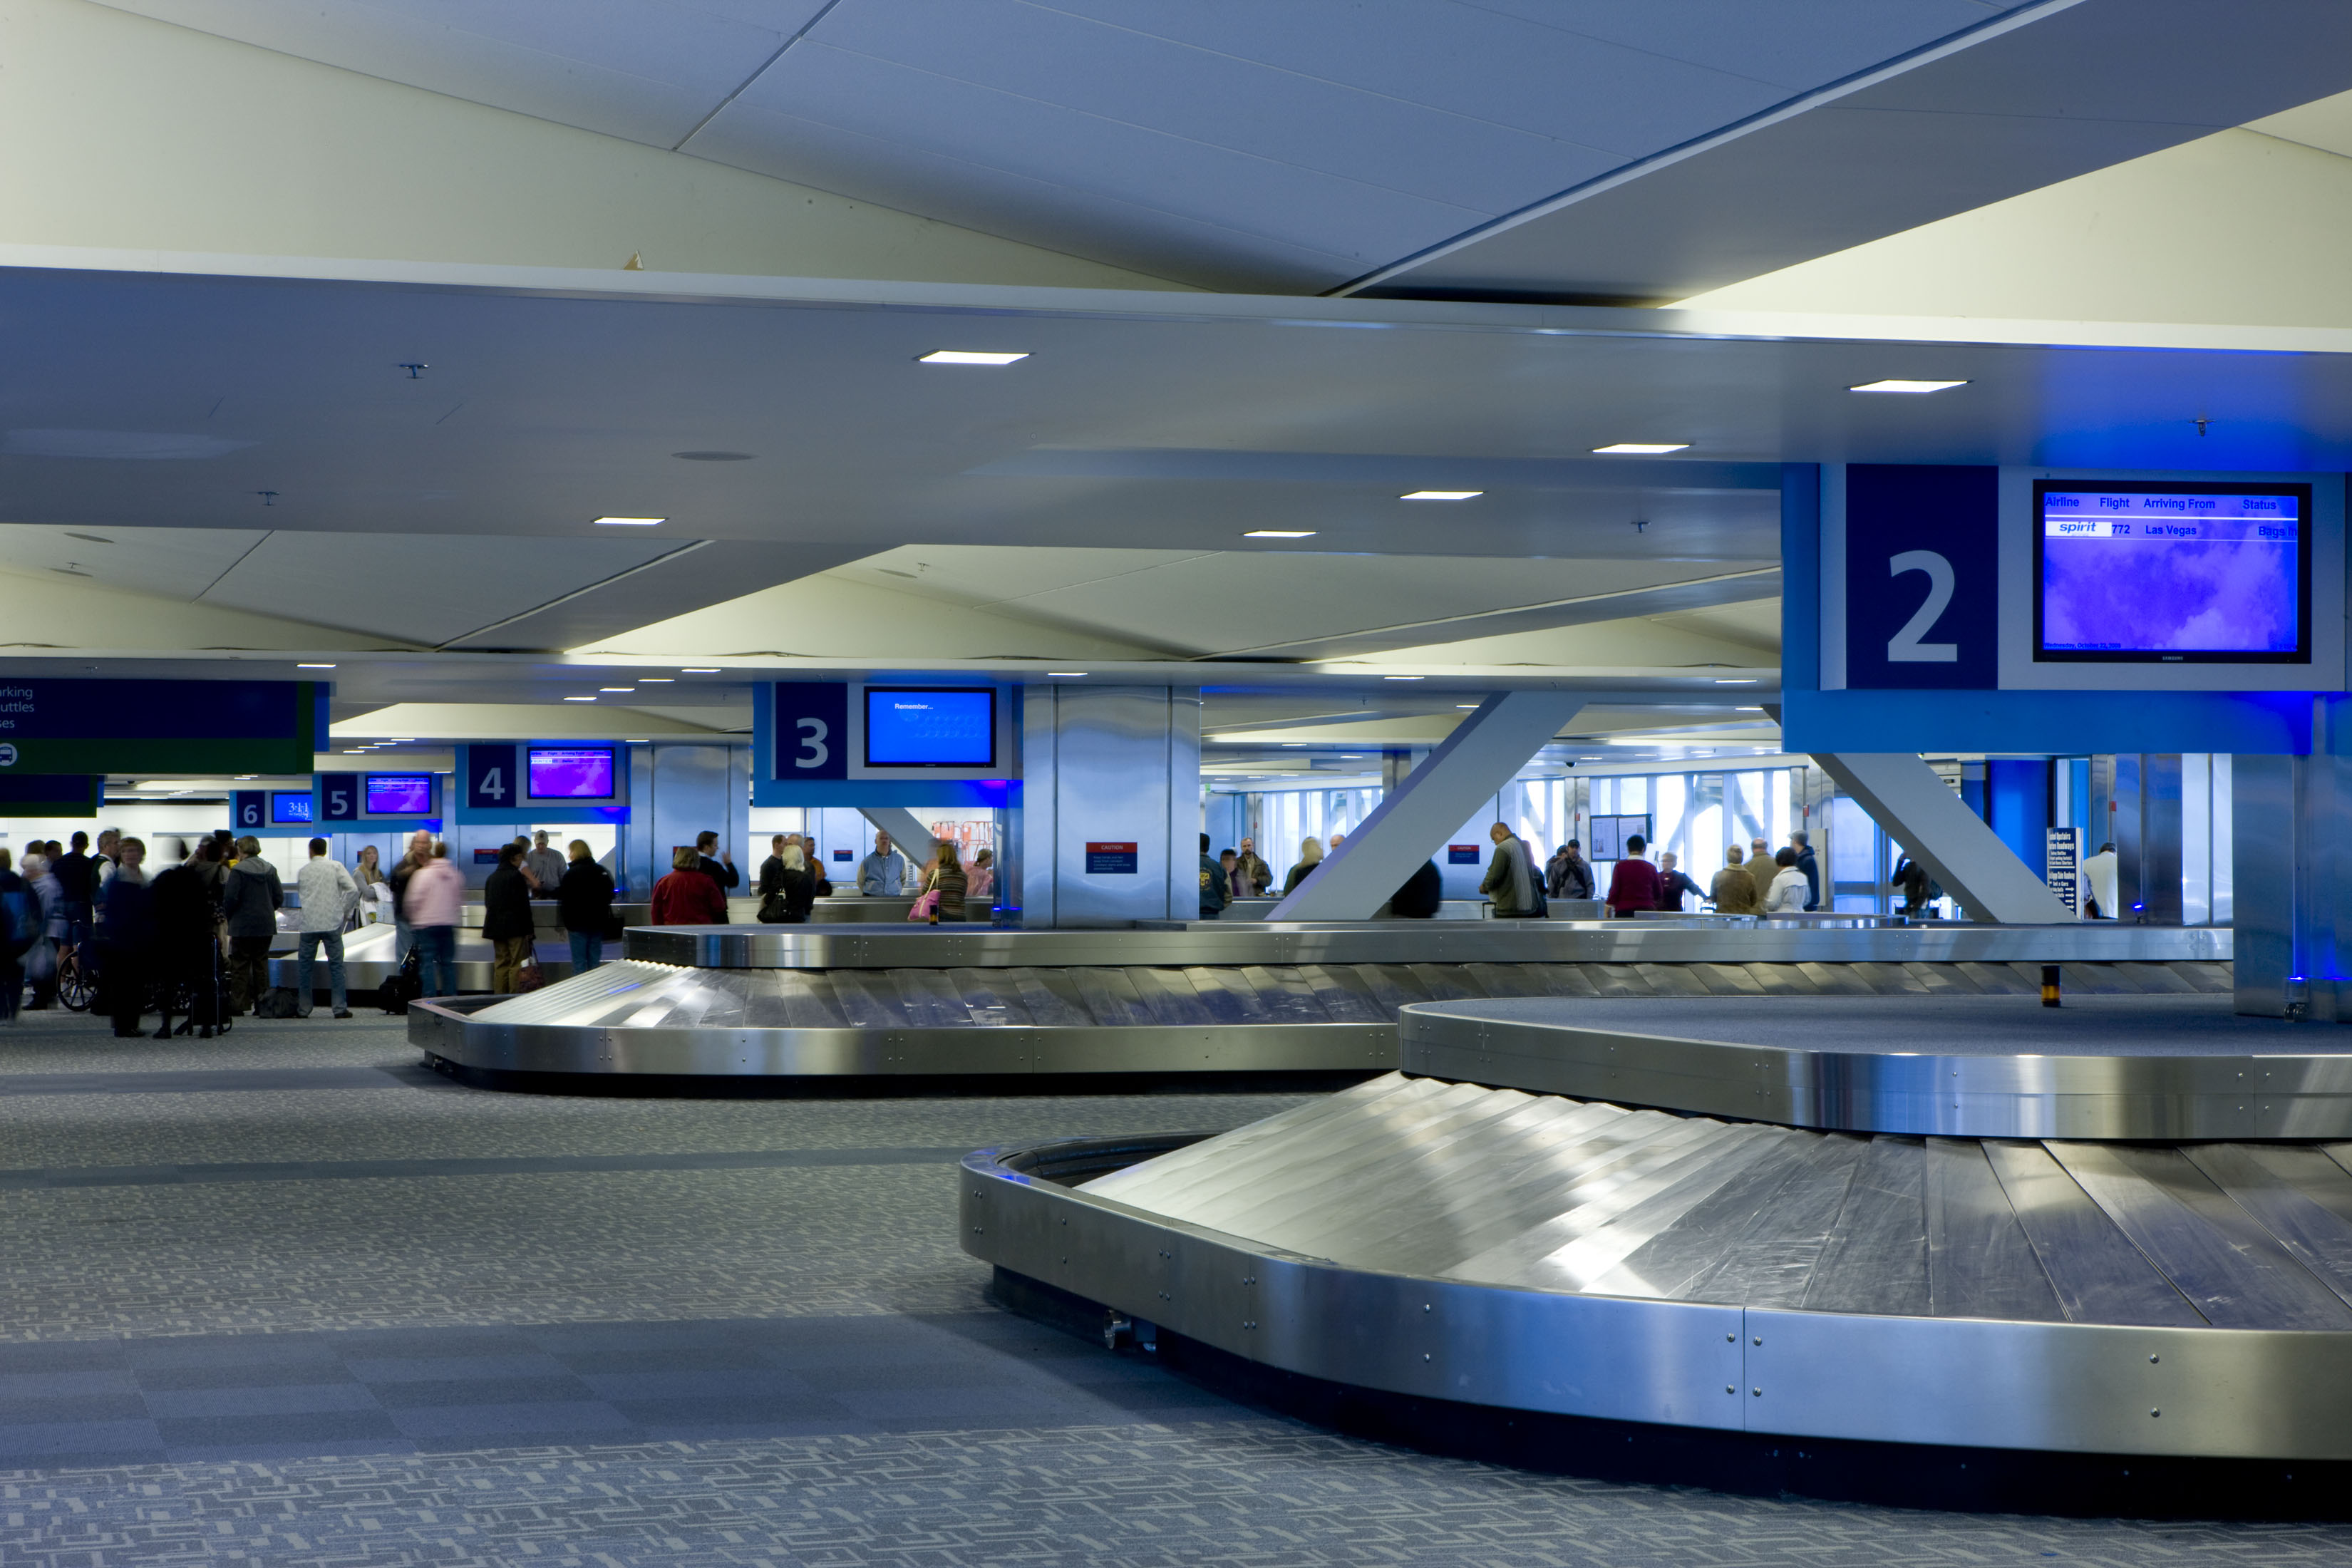 Get information about baggage policies, reclaiming baggage and reporting a lost item.